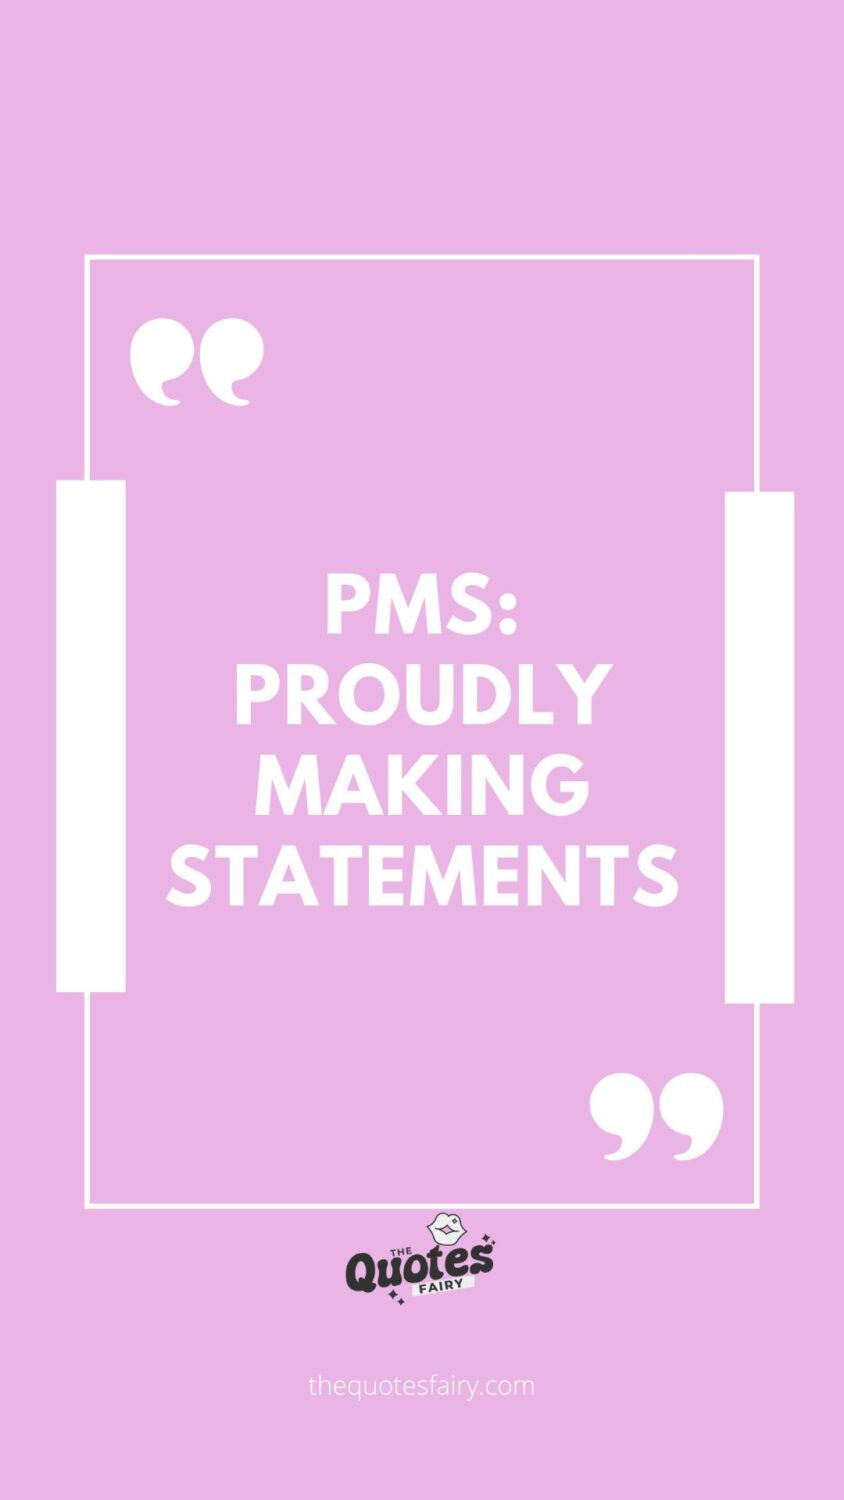 Funny PMS quotes